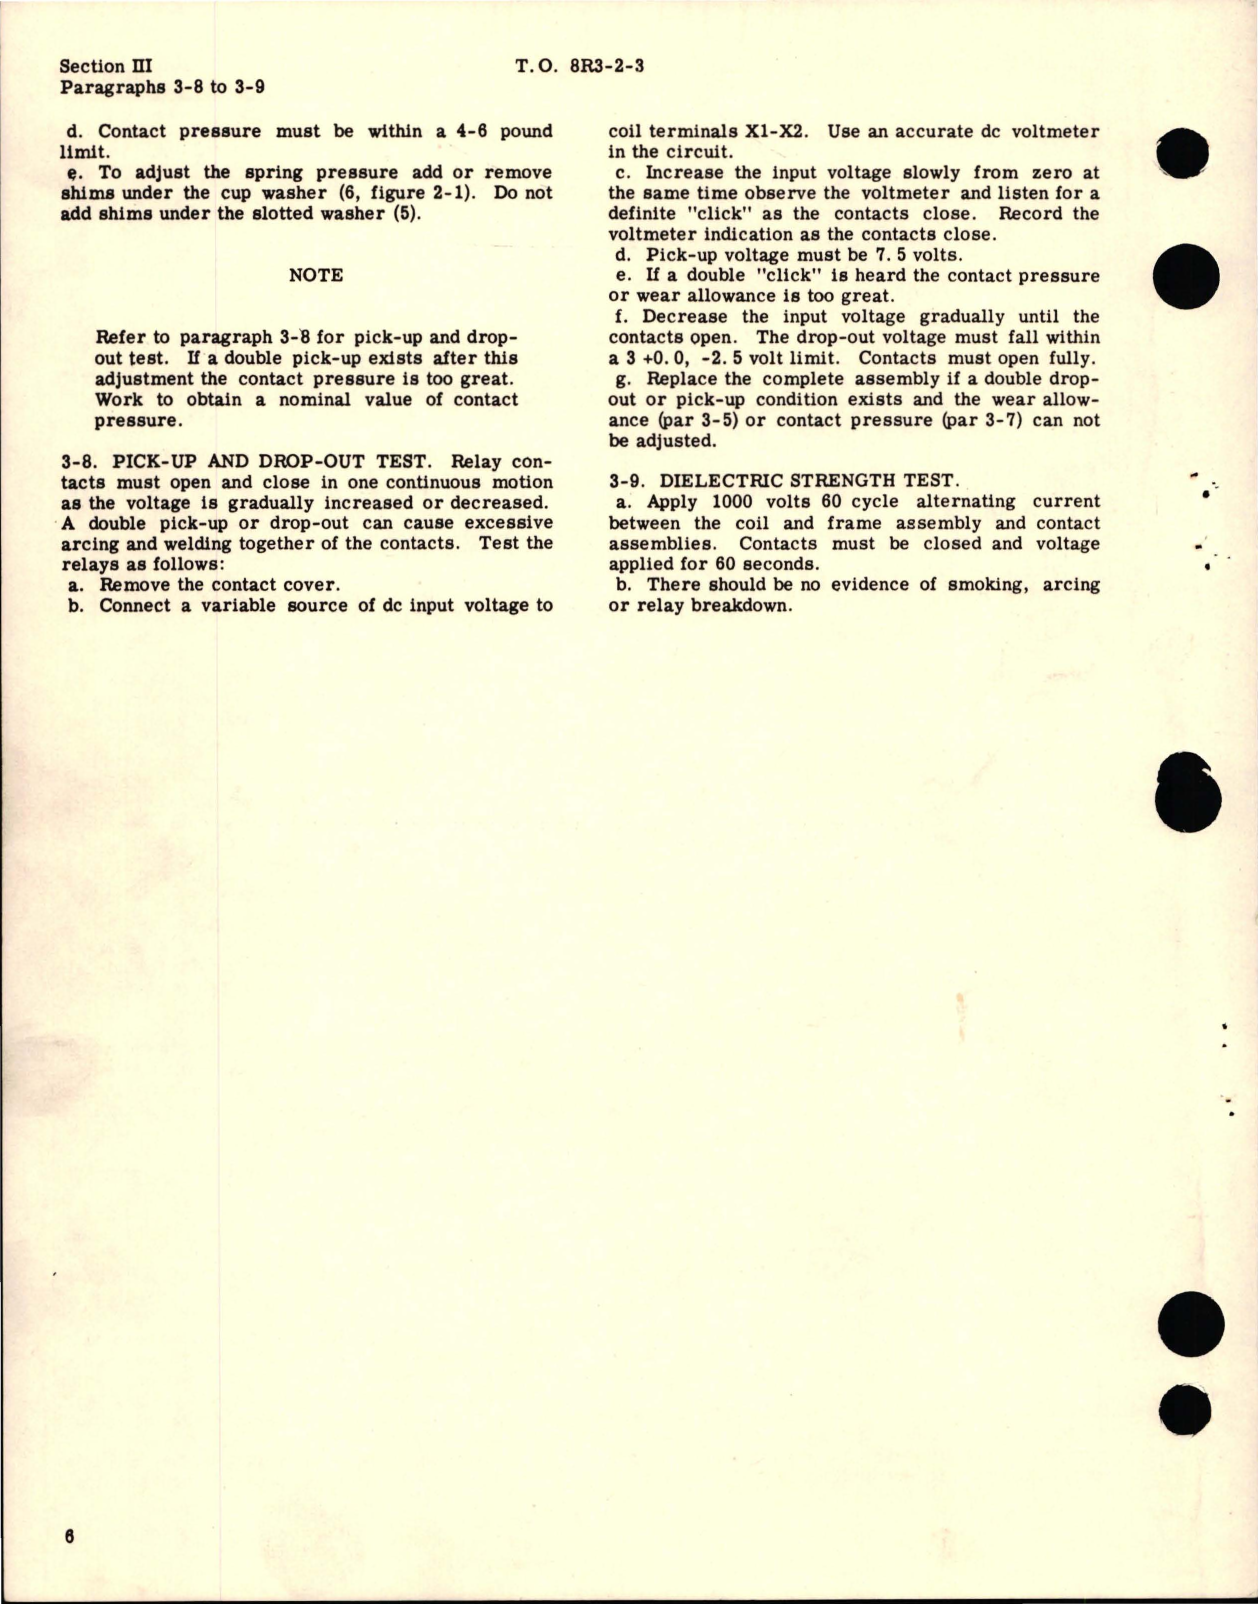 Sample page 8 from AirCorps Library document: Overhaul Instructions for Relays - 6041H Series